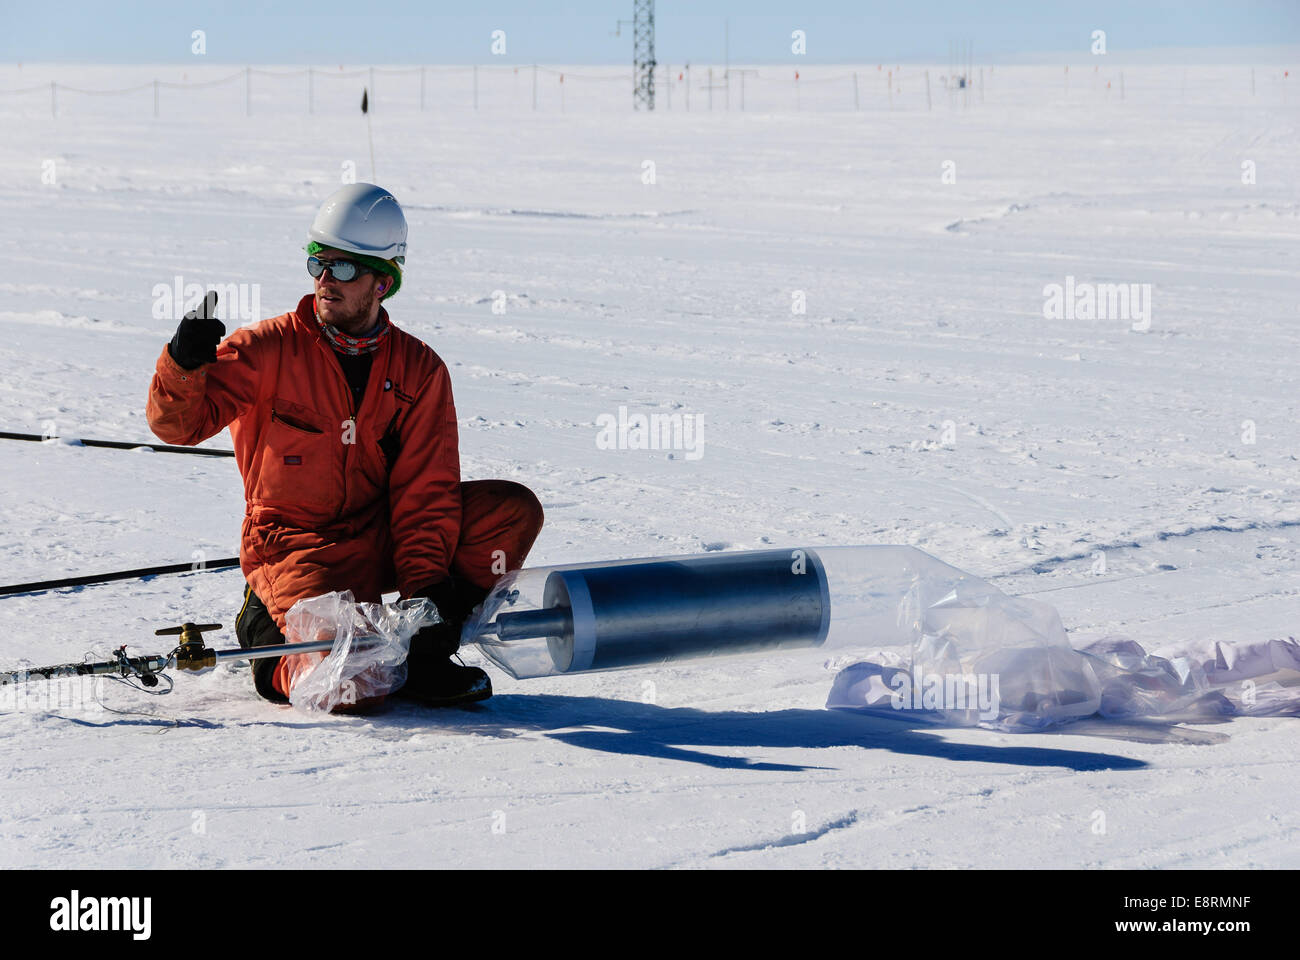 The Halley station team members assisted the BARREL team with the launches. Here, one gives the thumbs up to start inflating a B Stock Photo